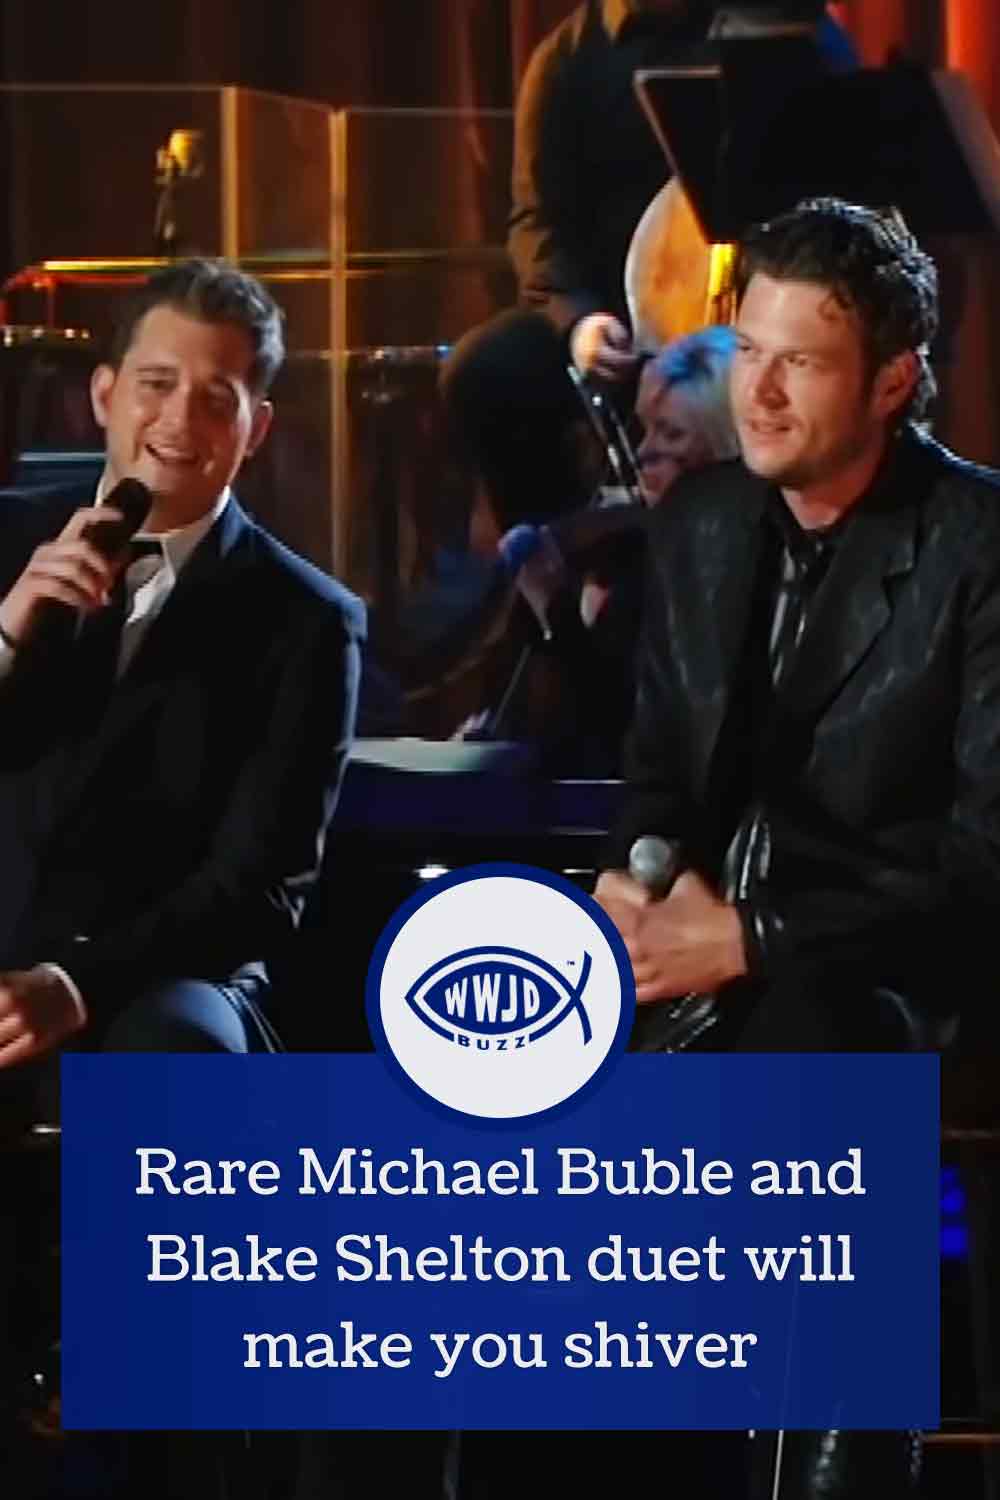 Rare Michael Bublé and Blake Shelton duet will make you shiver